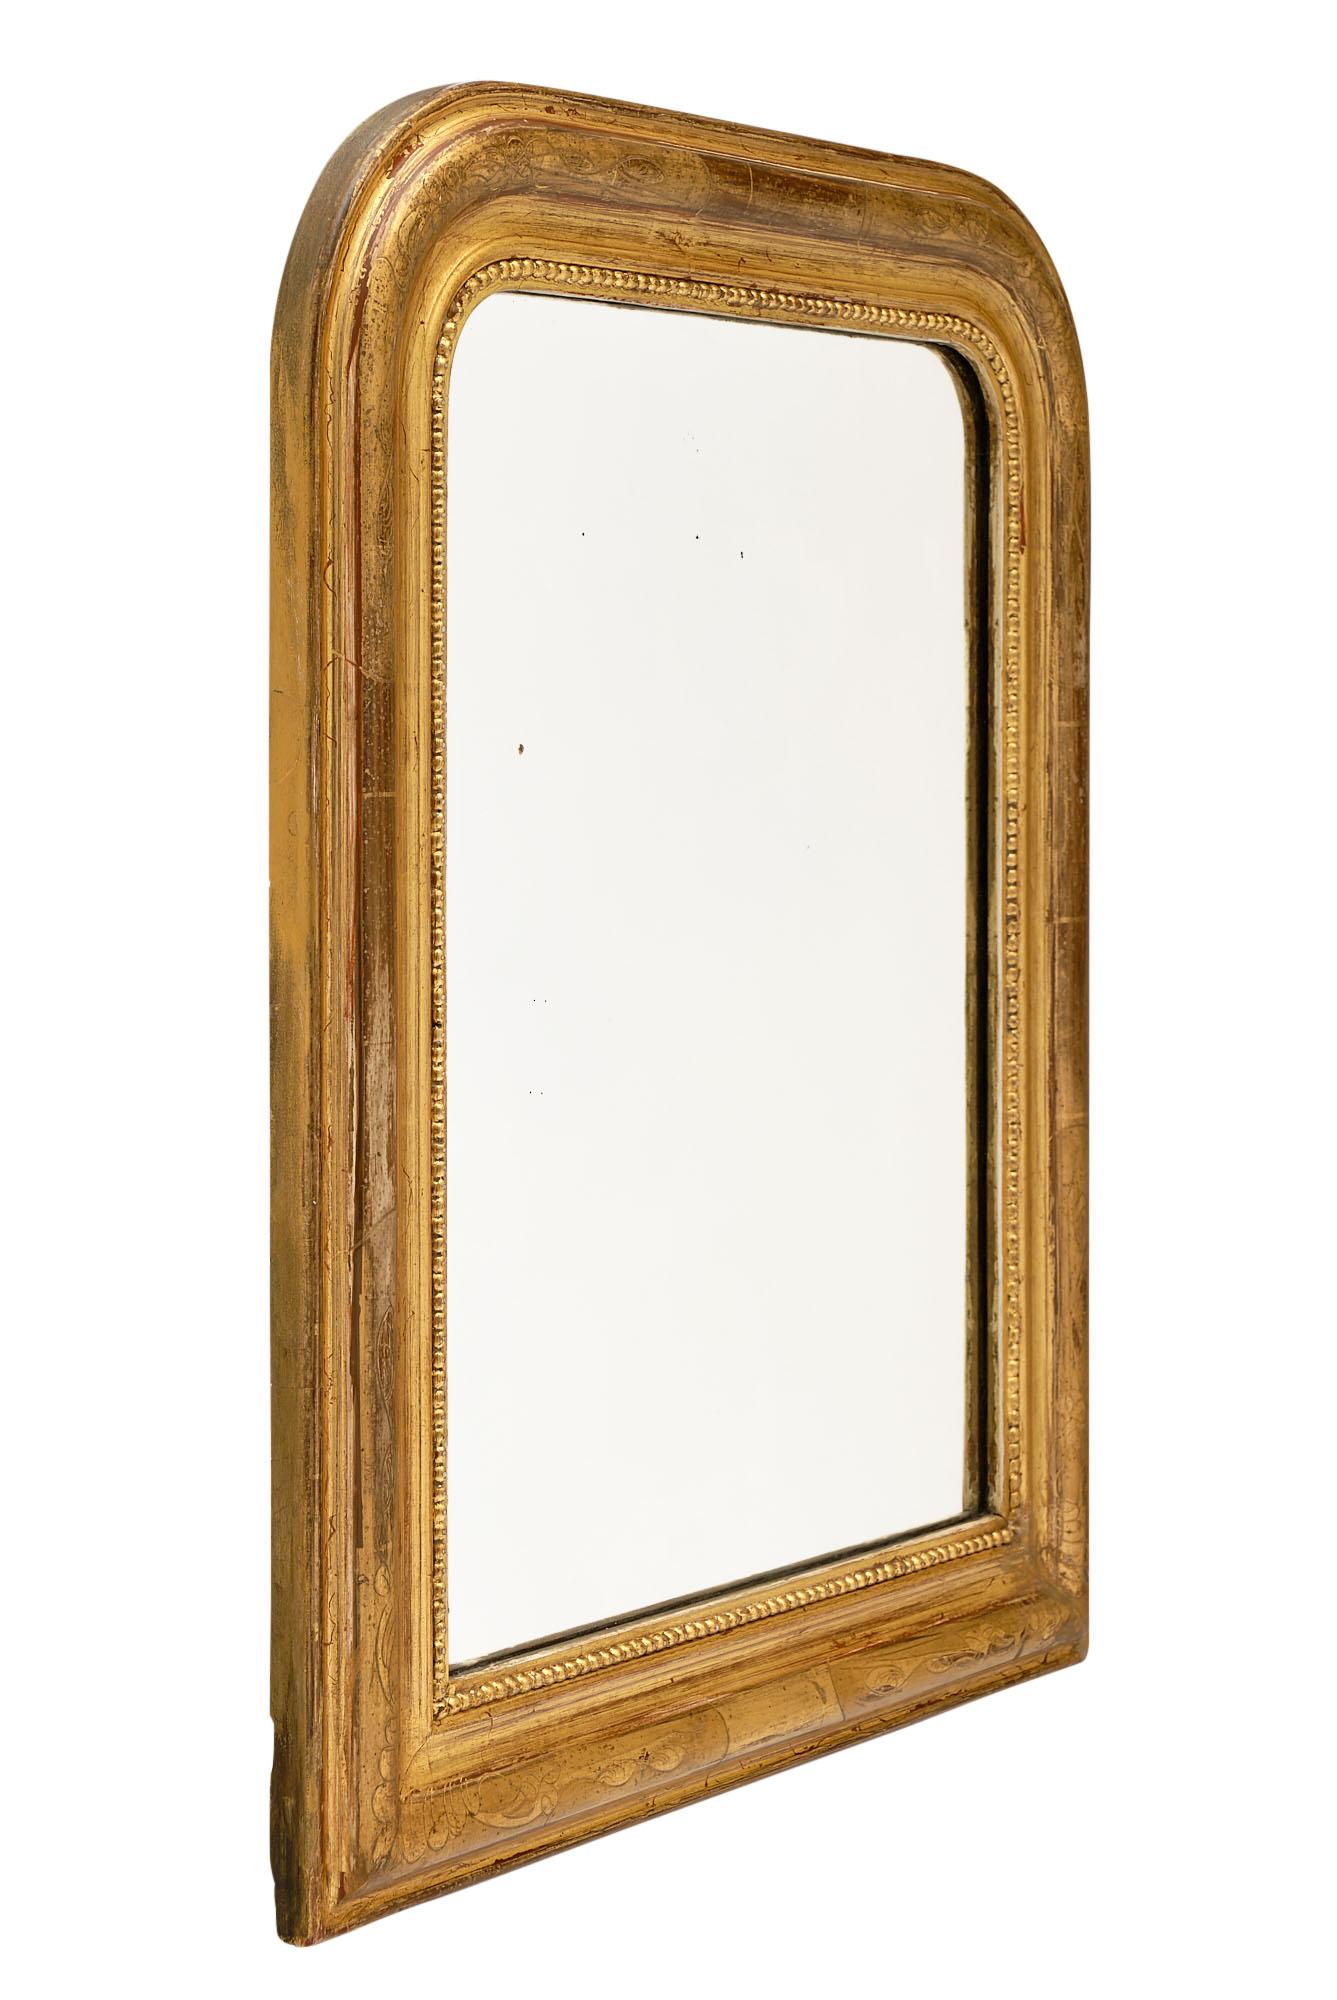 Petite Louis Philippe mirror from France with a wood and gesso frame; hand chiseled with a beautiful gold leaf. The sienna colored glaze shows through giving it a beautiful character and presence in any space.